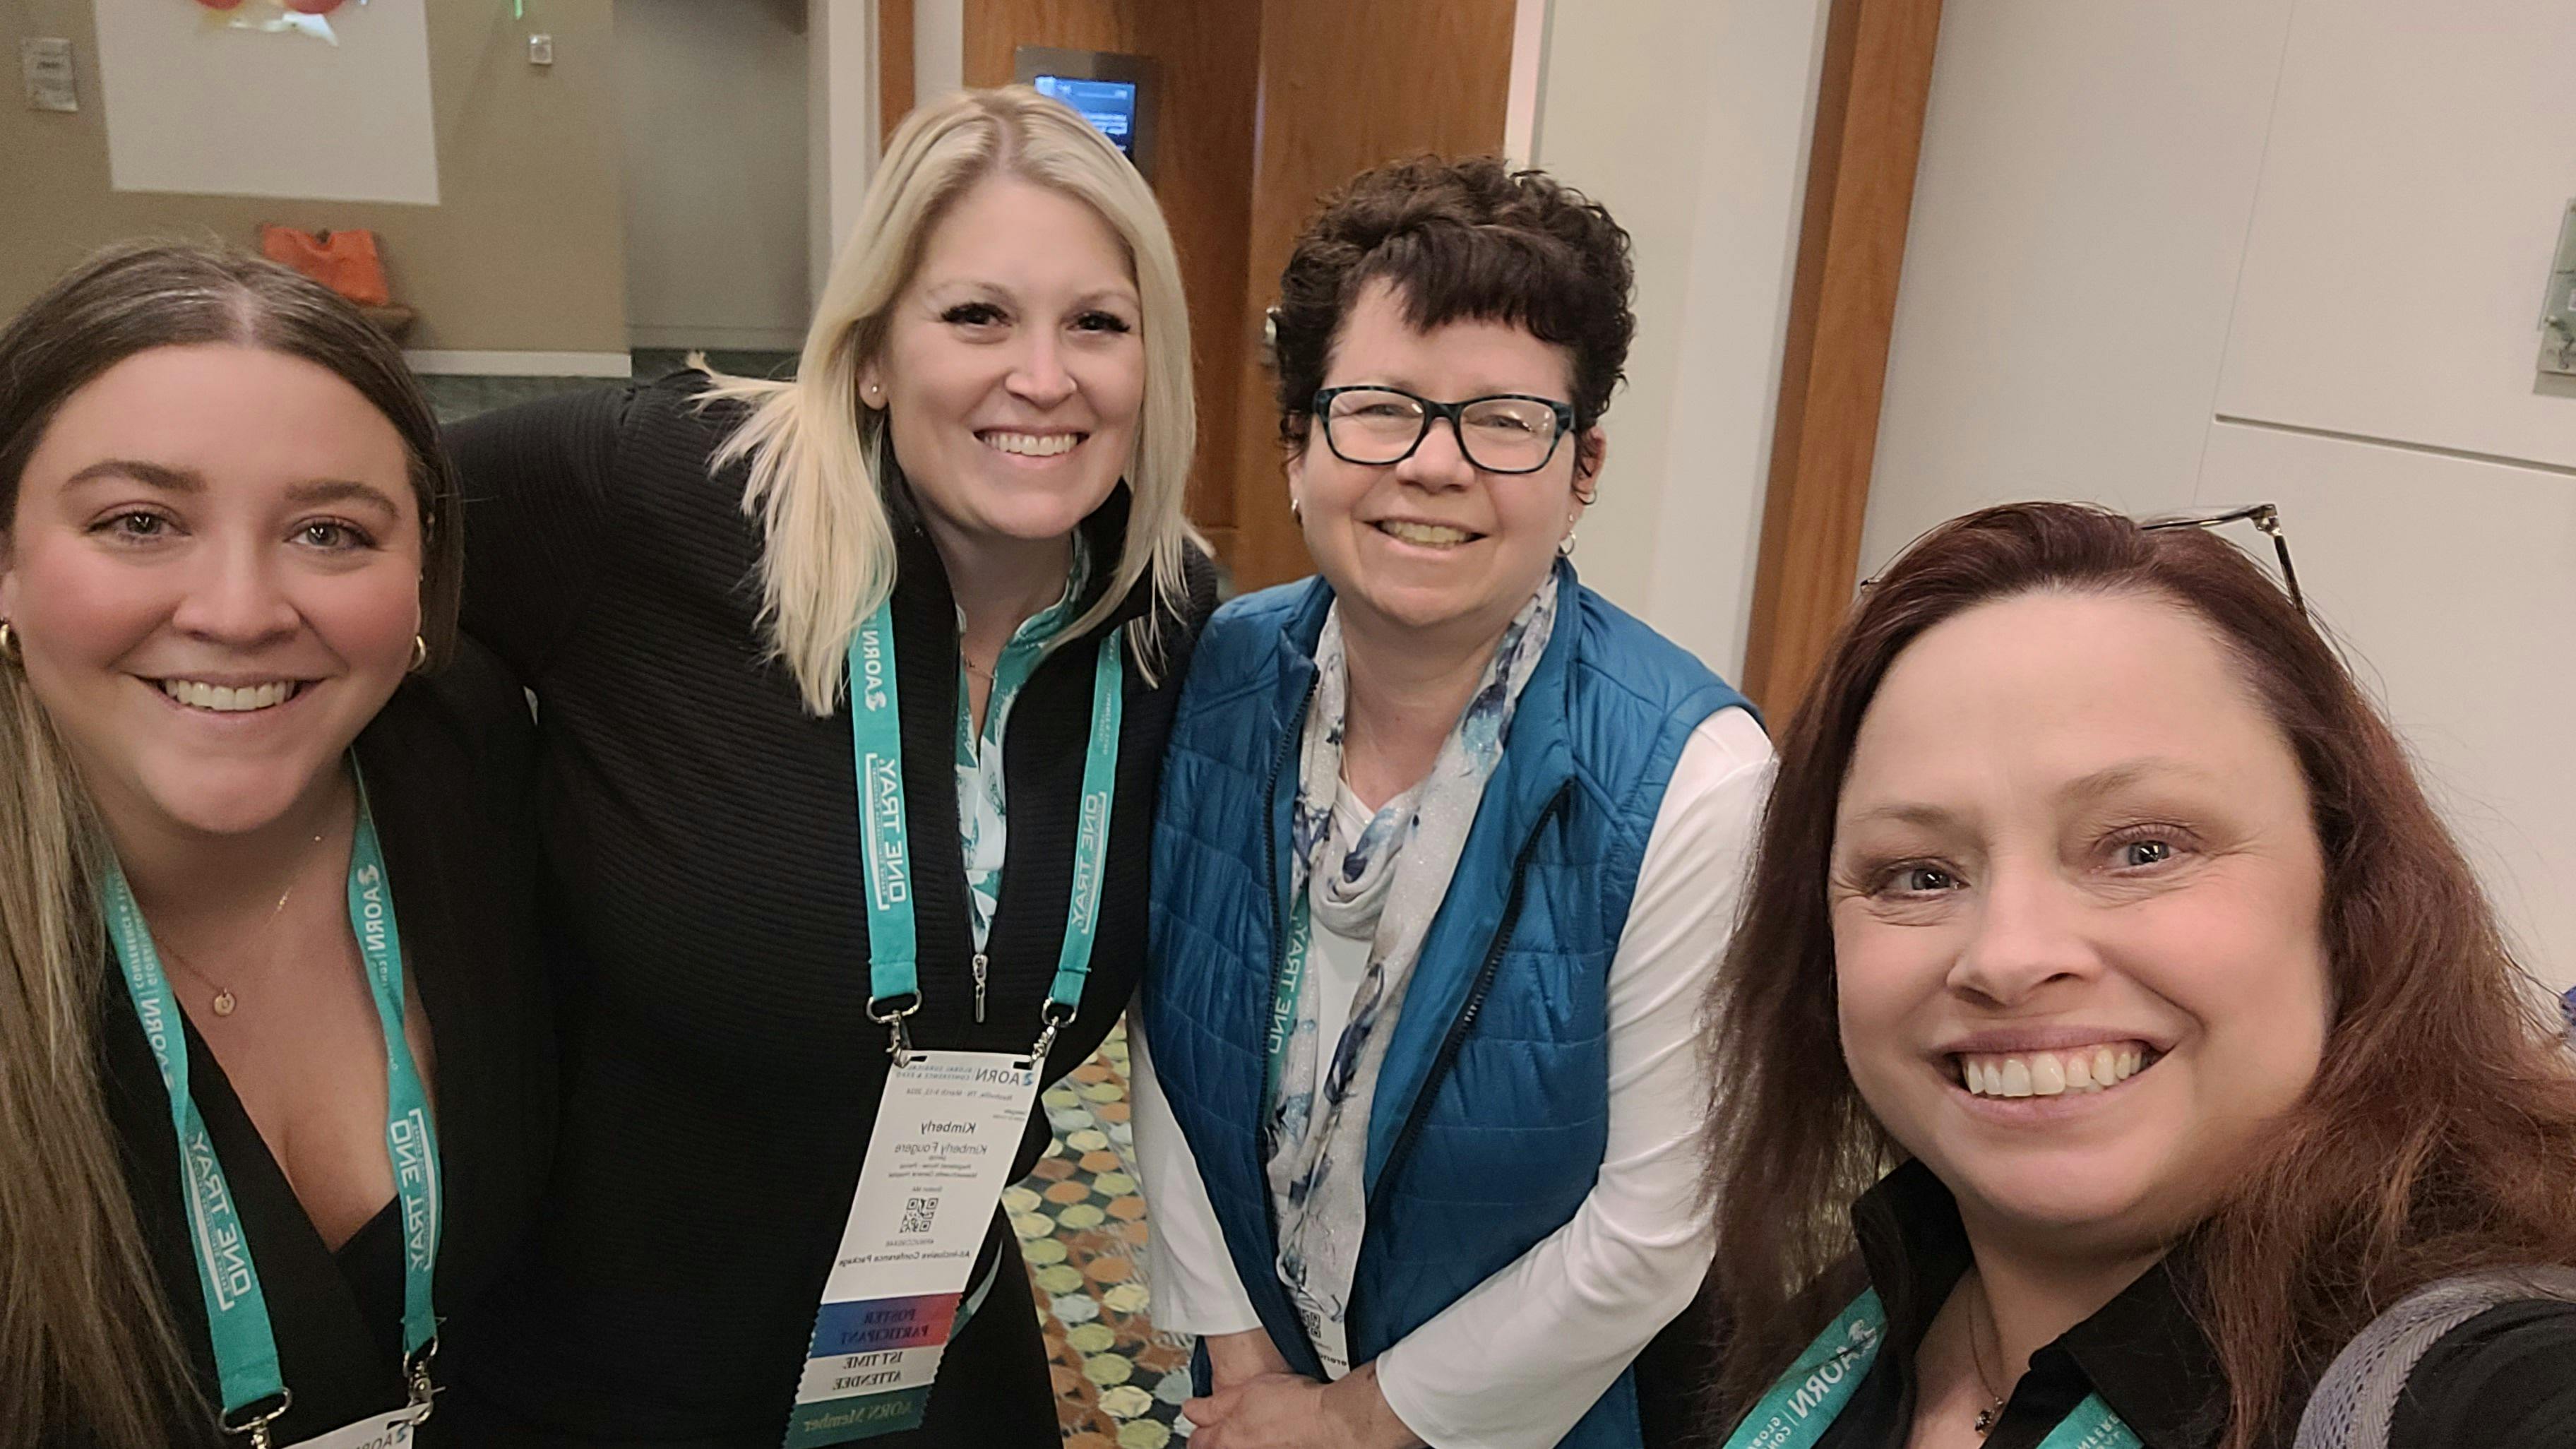 Emily Browne, BSN, RN; Kimberly Fougere, ABSN, RN; Shelley Almeida, BSN, RN, CNOR, with Tori Whitacre Martonicz, senior editor of Infection Control Today. All 3 presenters are from the Massachusetts General Hospital in Boston, Massachusetts (MGH).